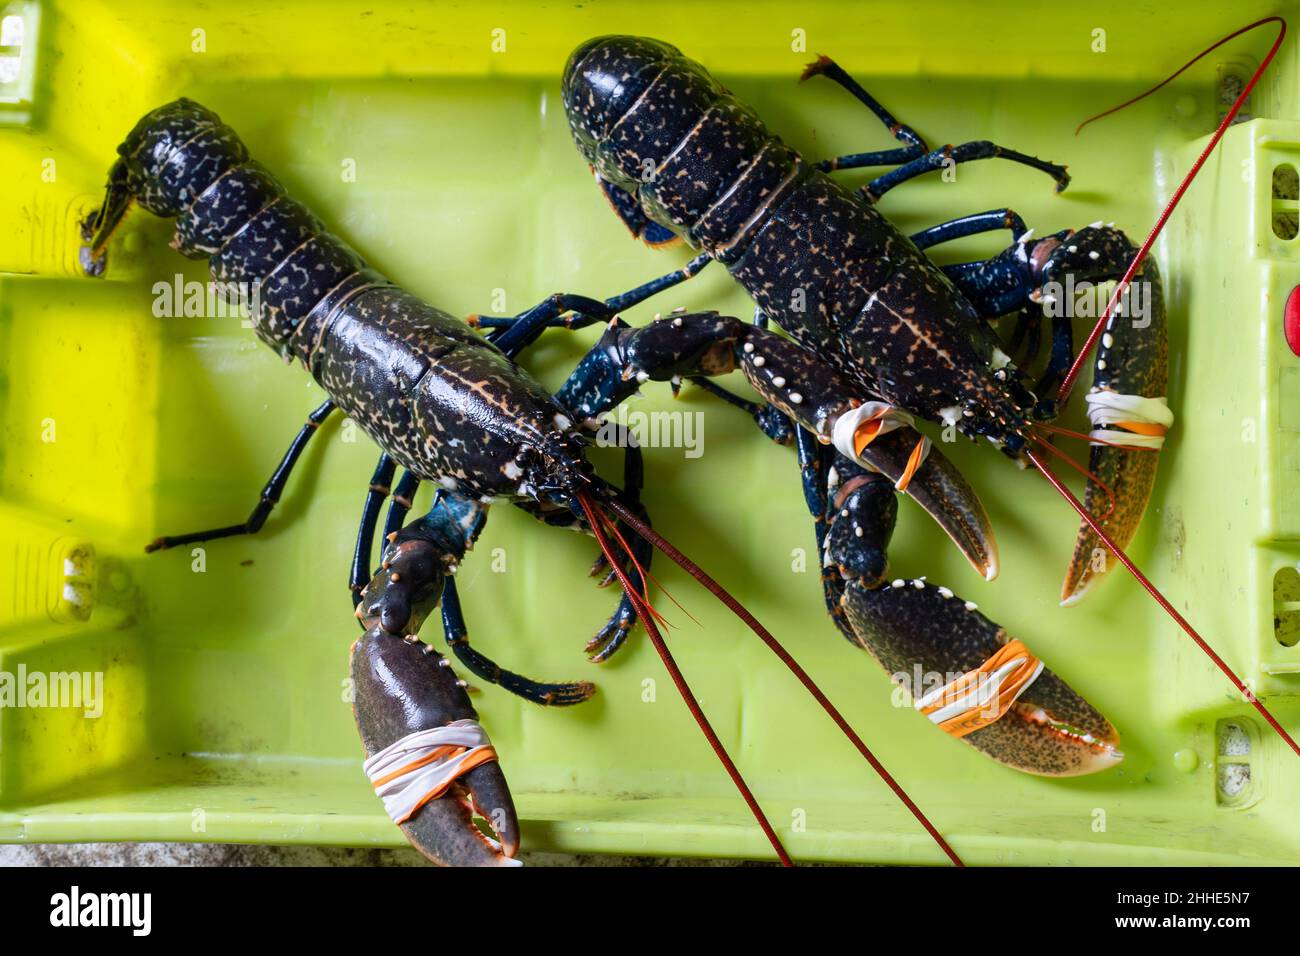 Two live lobsters with their claws tied with elastic bands and inside a box, freshly arrived at the fishing port for sale. Stock Photo